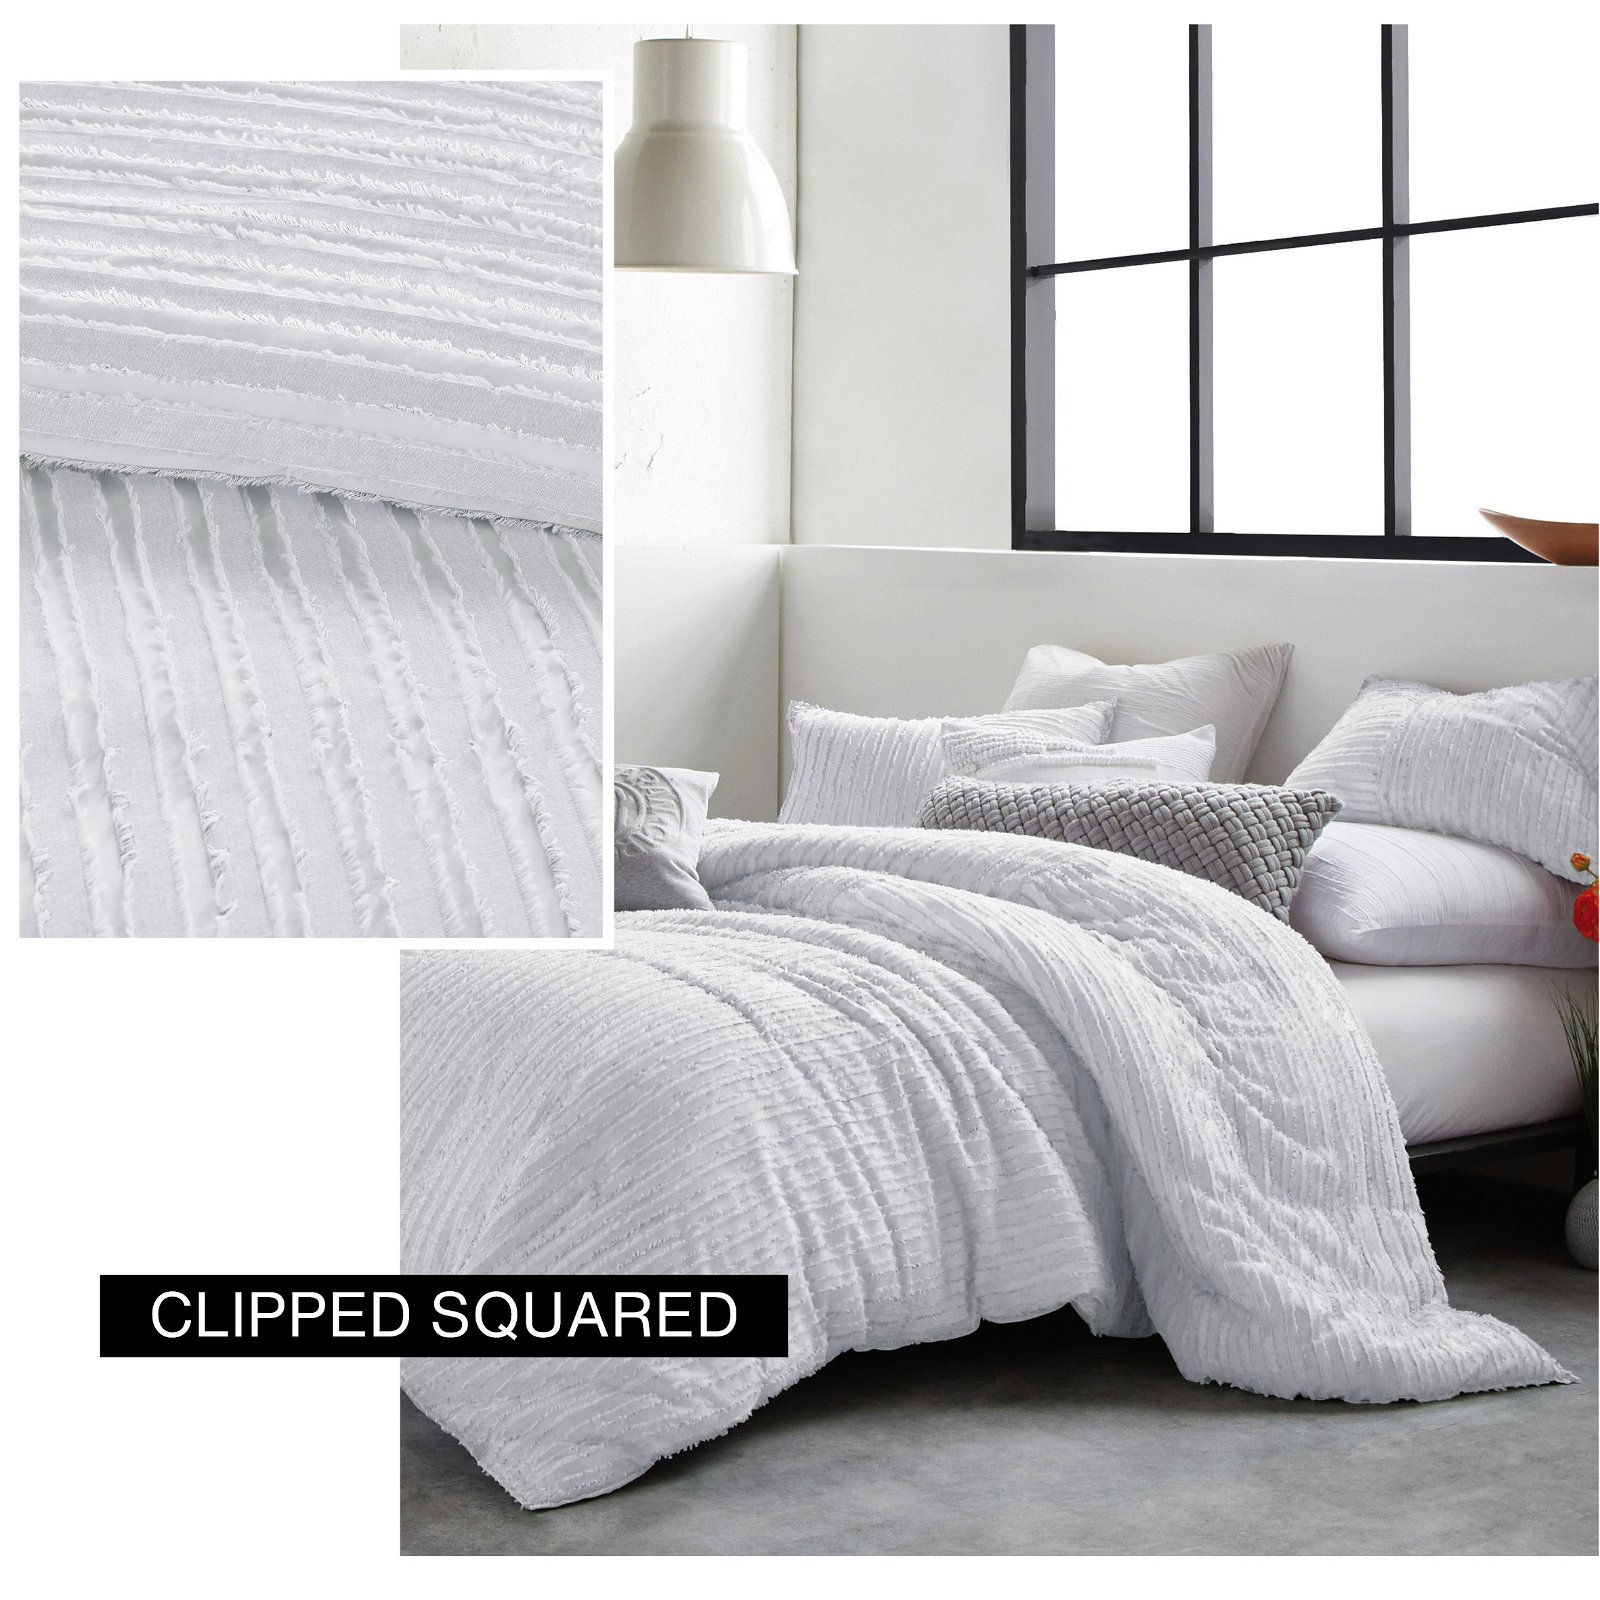 DKNY Clipped Squared Bedding 